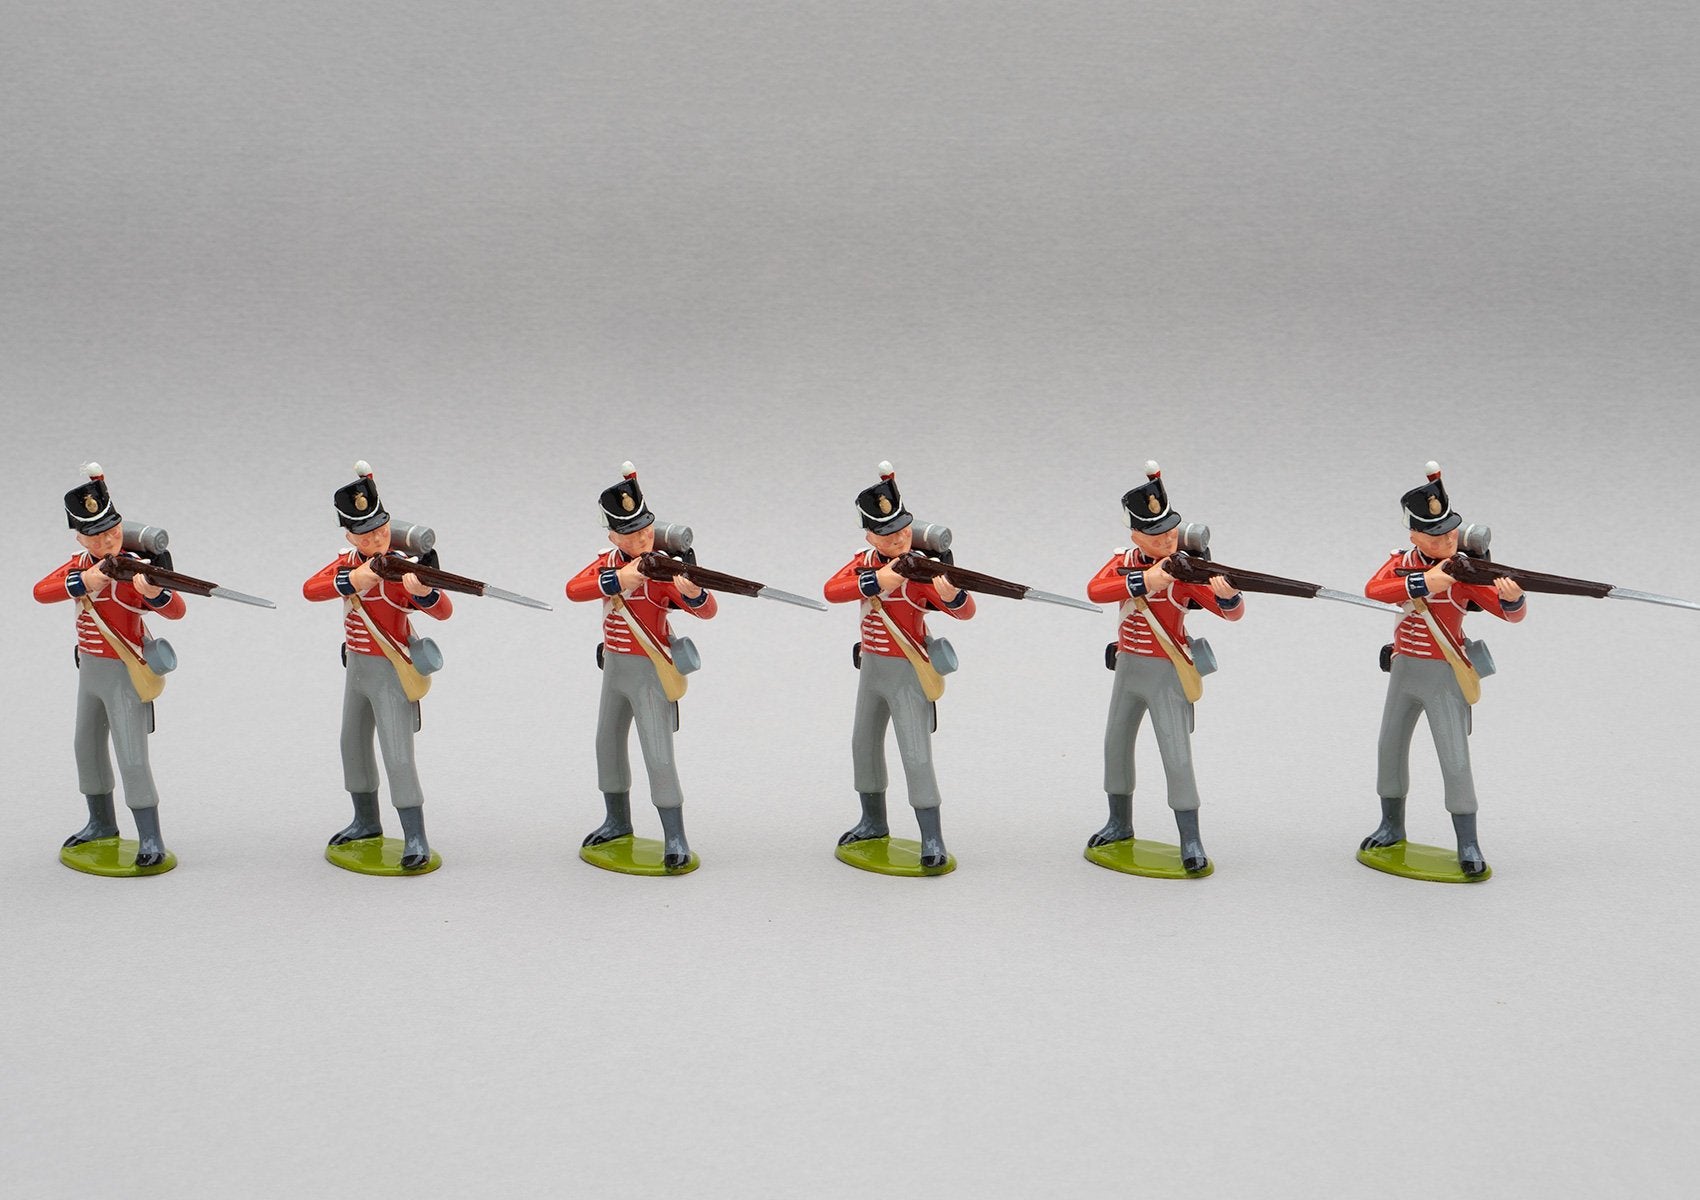 Set 129 1st Foot Guards, Waterloo 1815 | British Infantry | Napoleonic Wars | Six men standing firing as the rear rank of a defensive square. 1st Infantry Division | Waterloo | © Imperial Productions | Sculpt by David Cowe